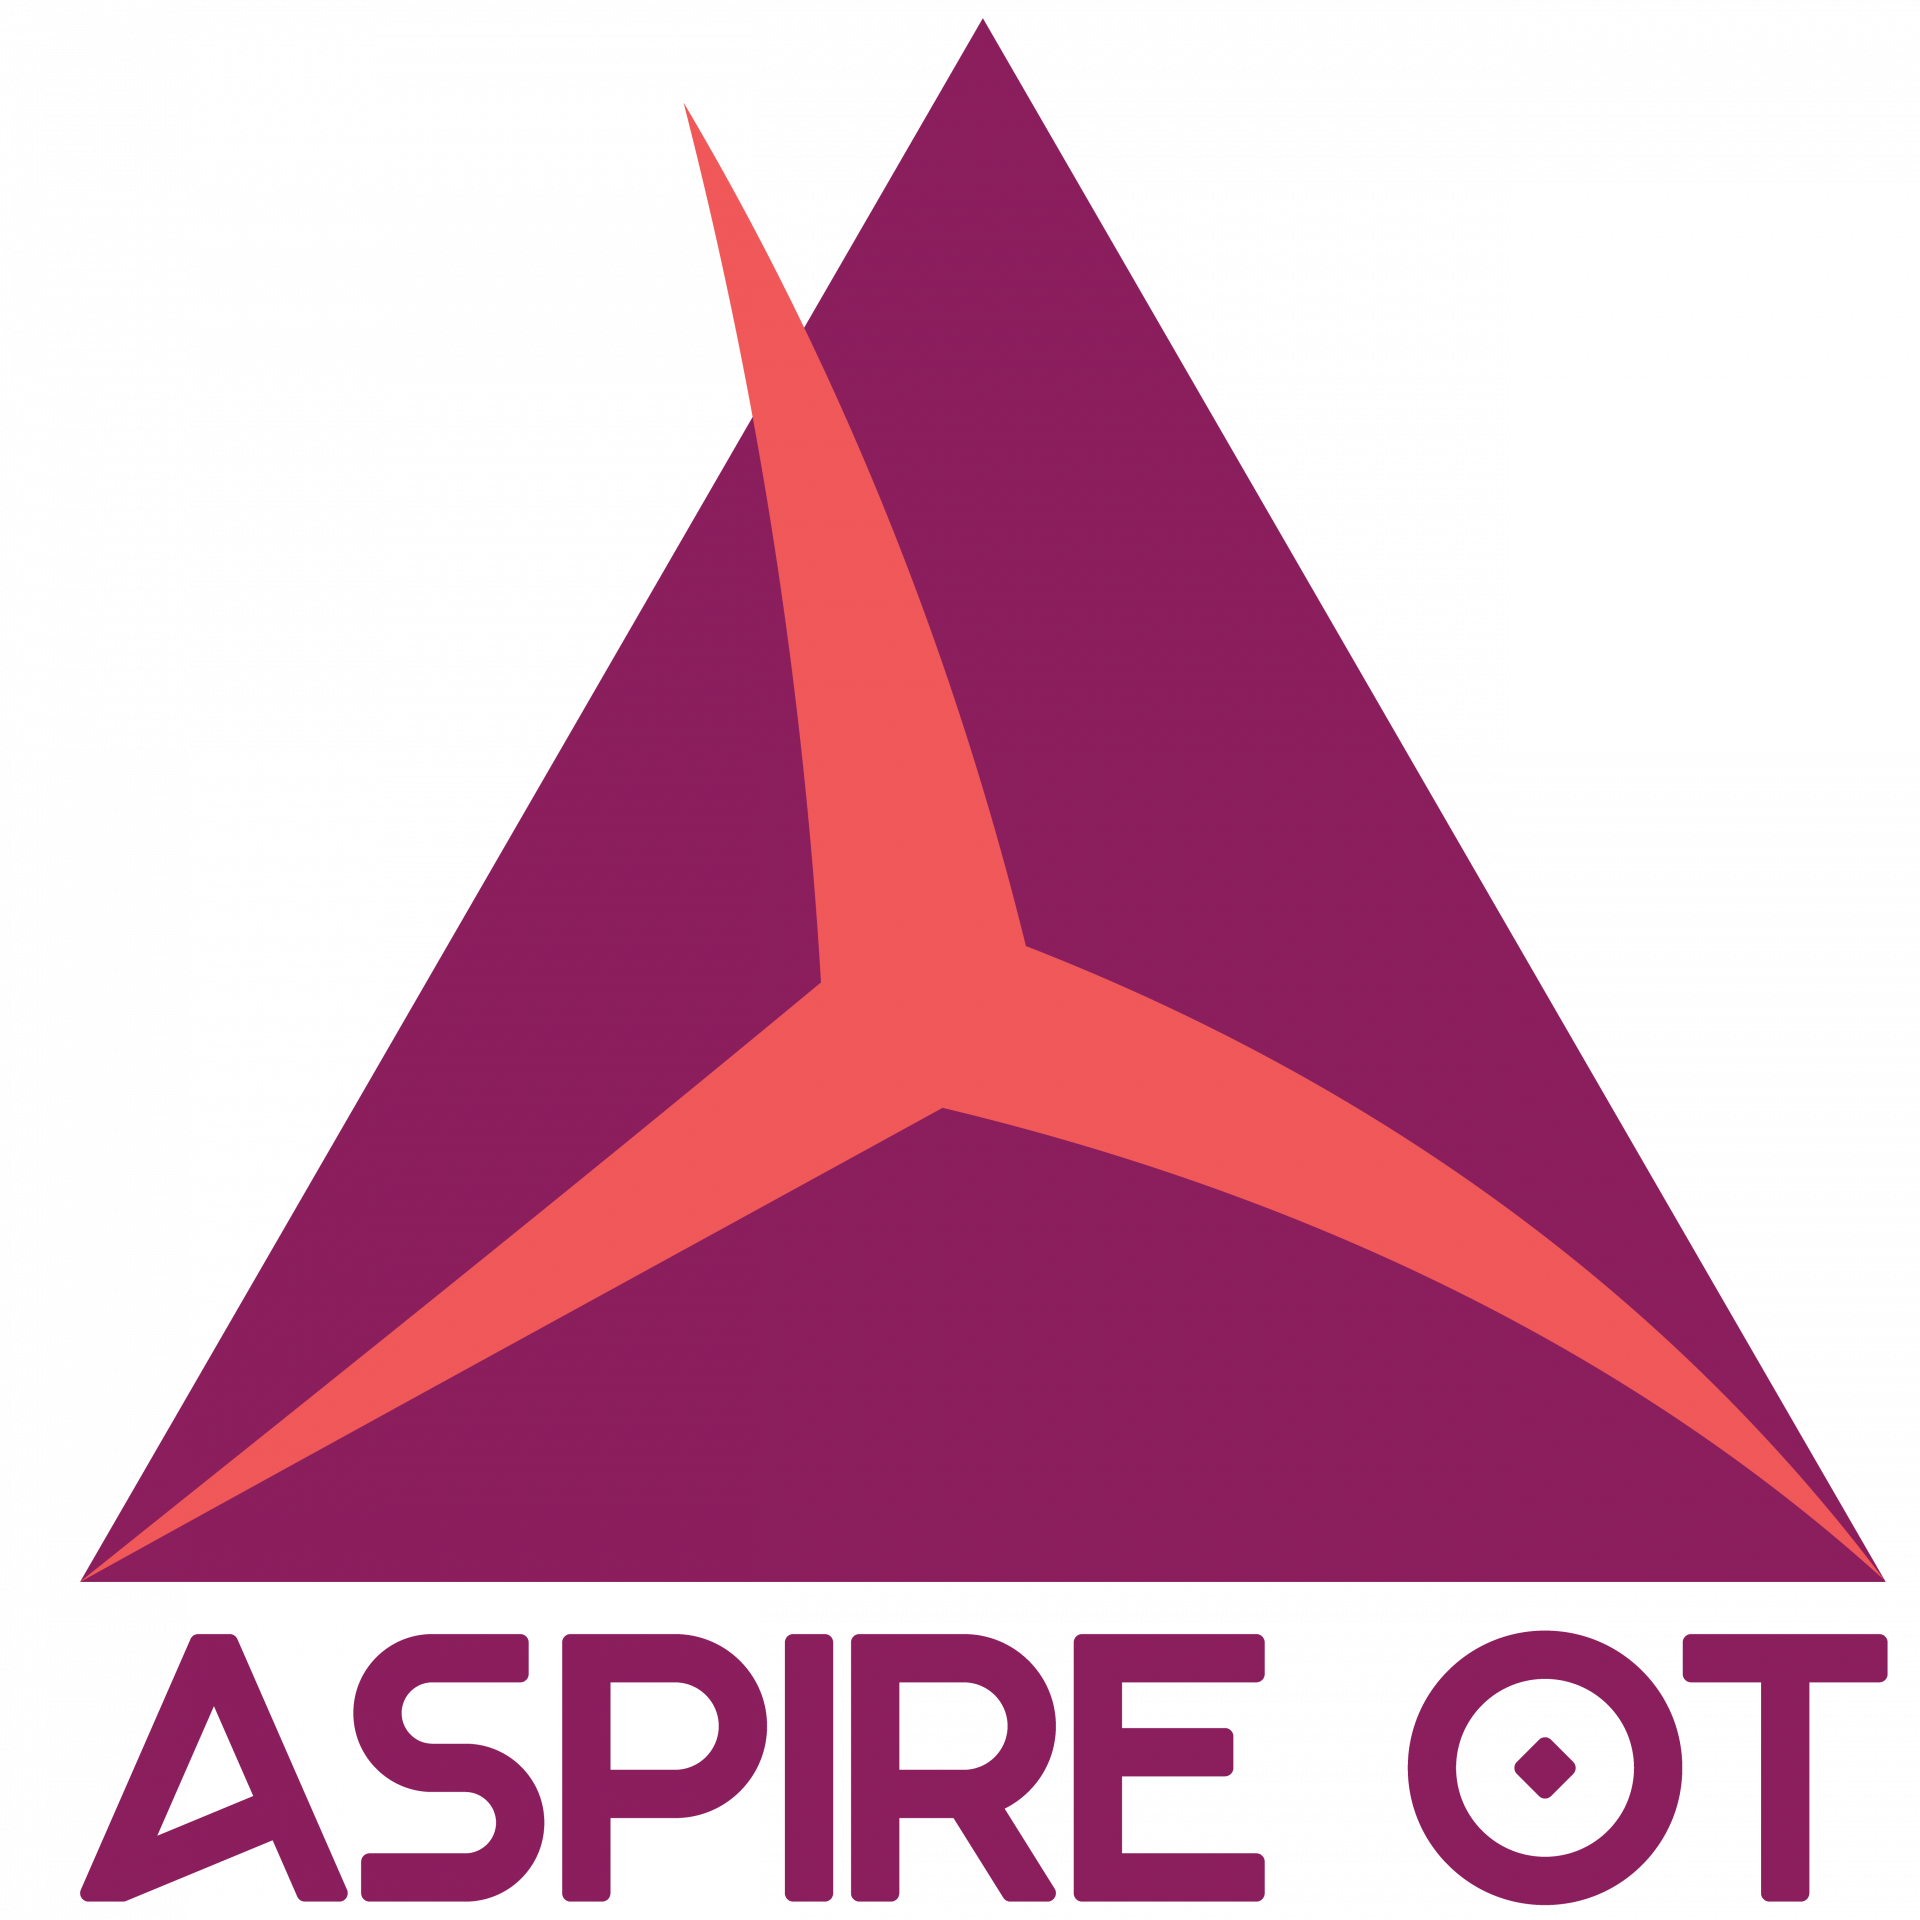 Purple triangle with 3 point star inside with words aspire ot beneath the triangle